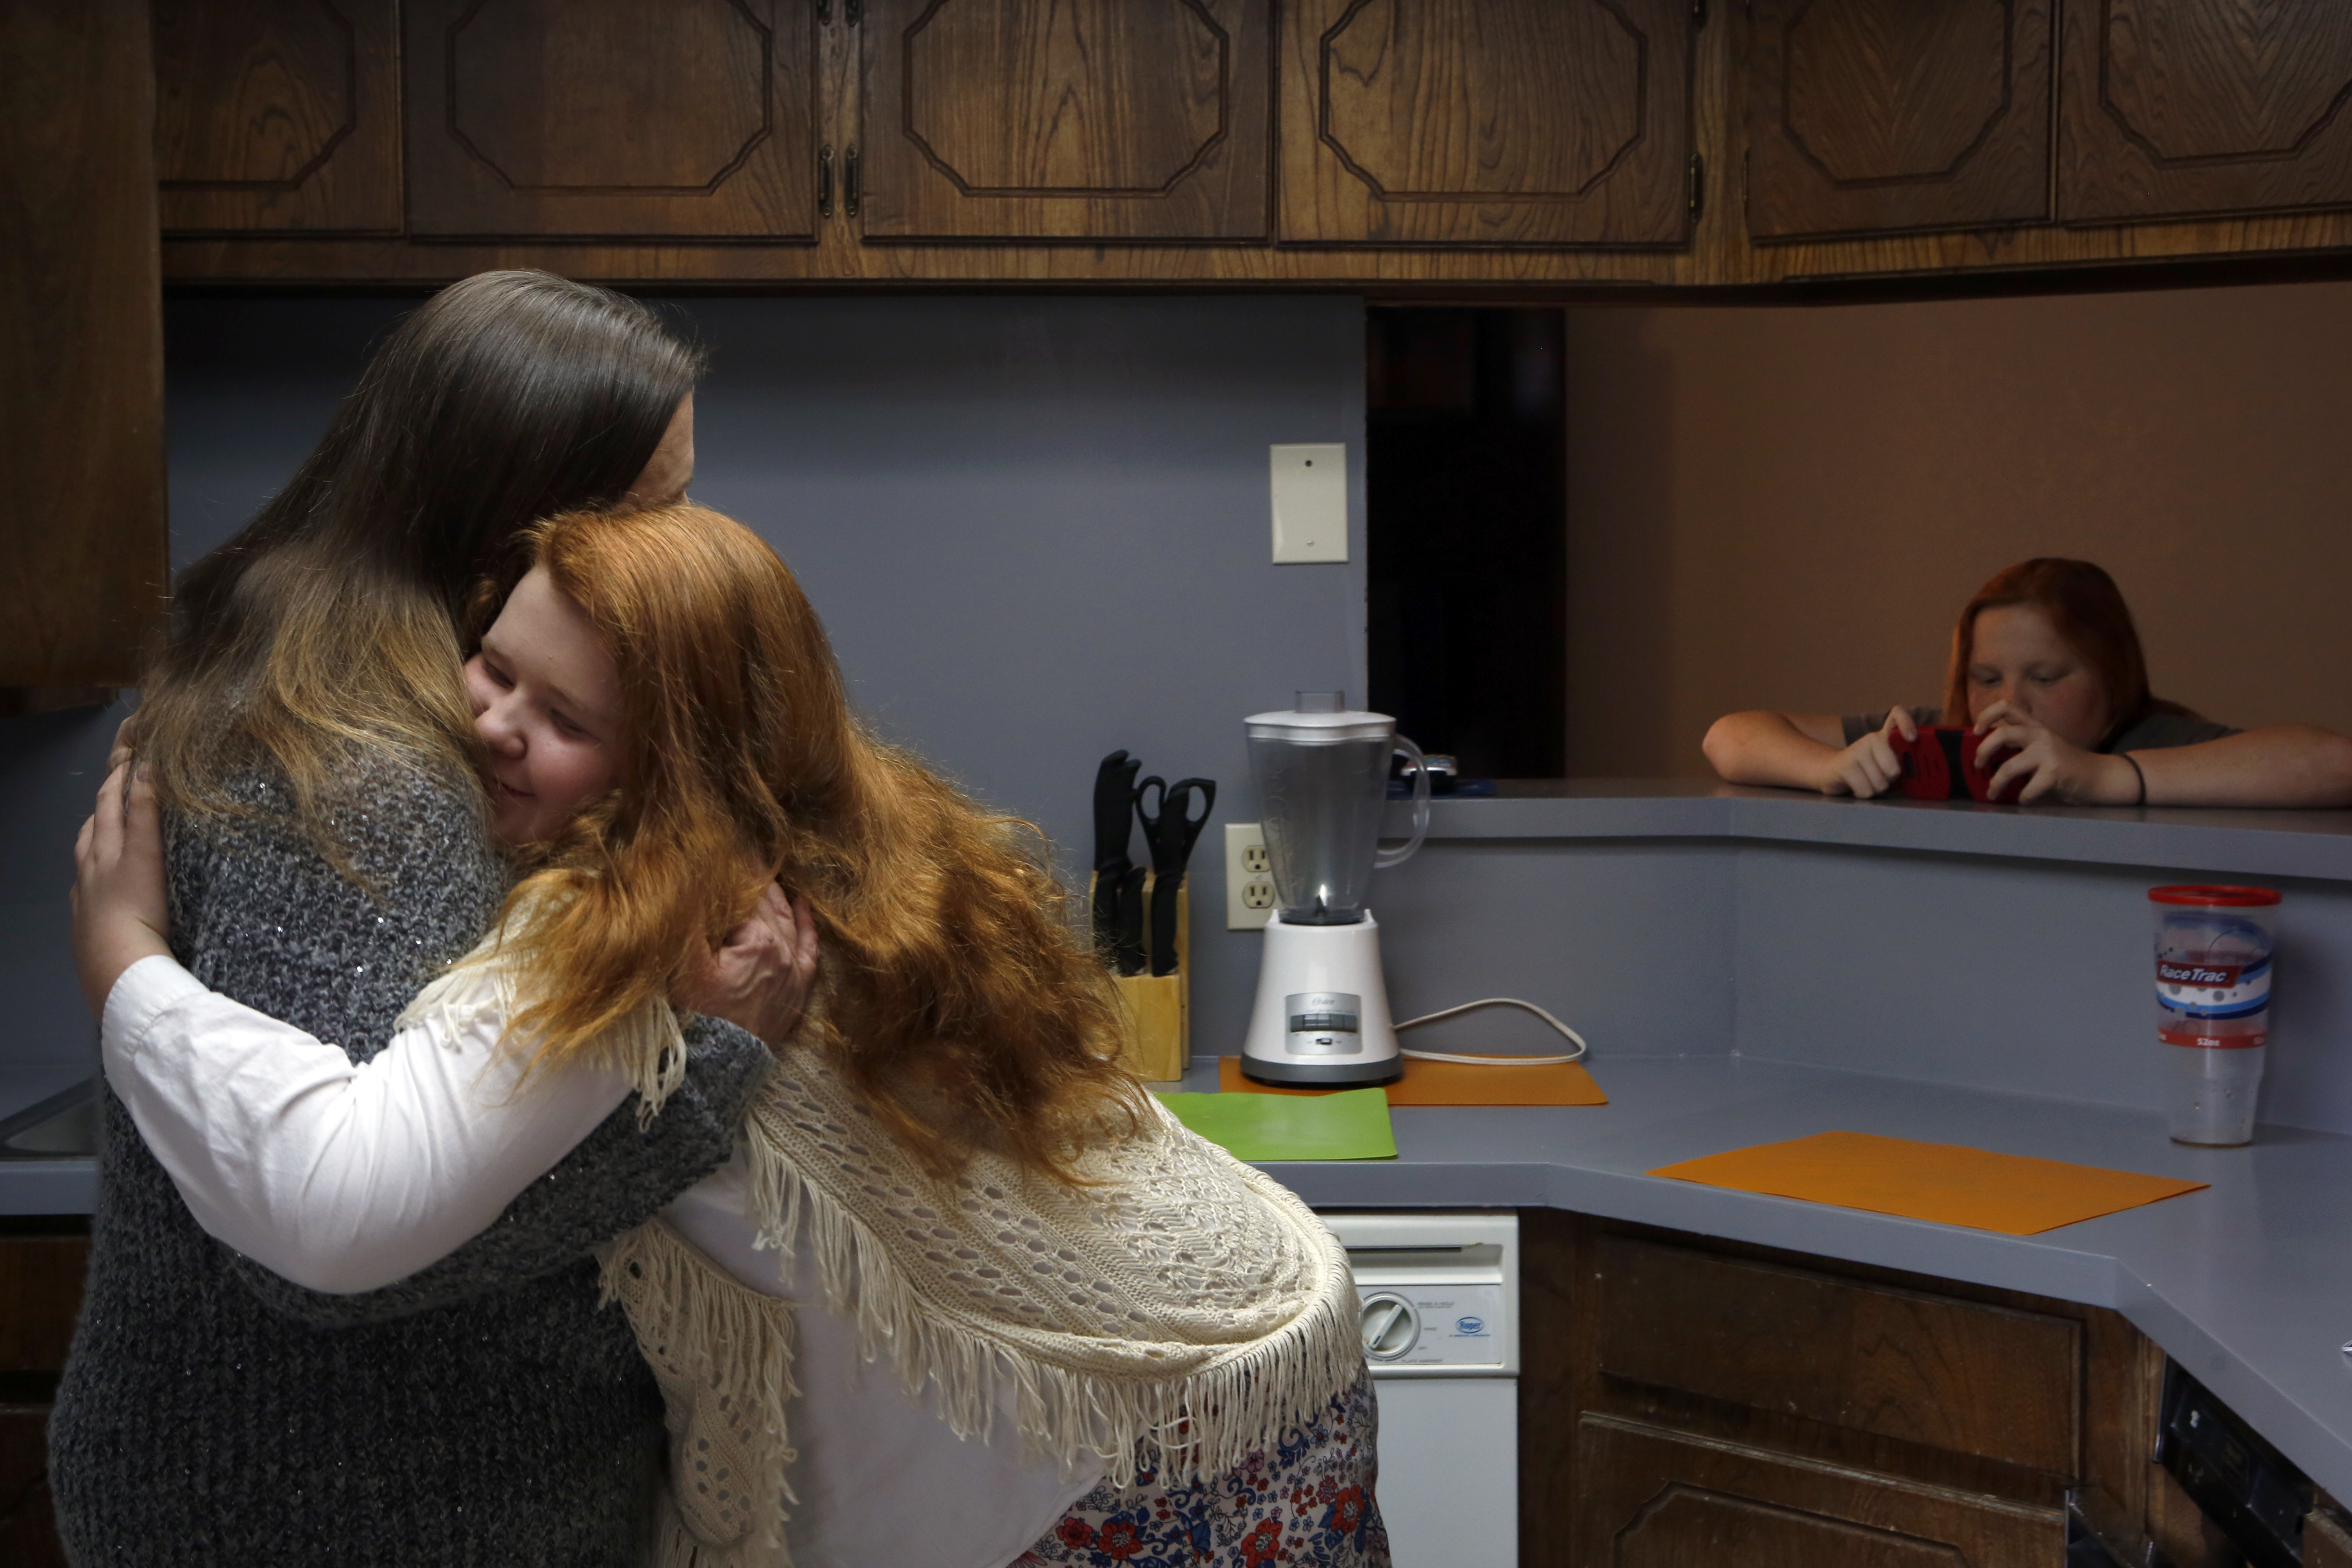 After three years staying in motels, the Rosenheim family just moved into a three-bedroom home where each child has their own bed. In the kitchen, Belinda gives her daughter Allison (14) a hug and Tony looks at his phone. (photo copyright Lara Solt)